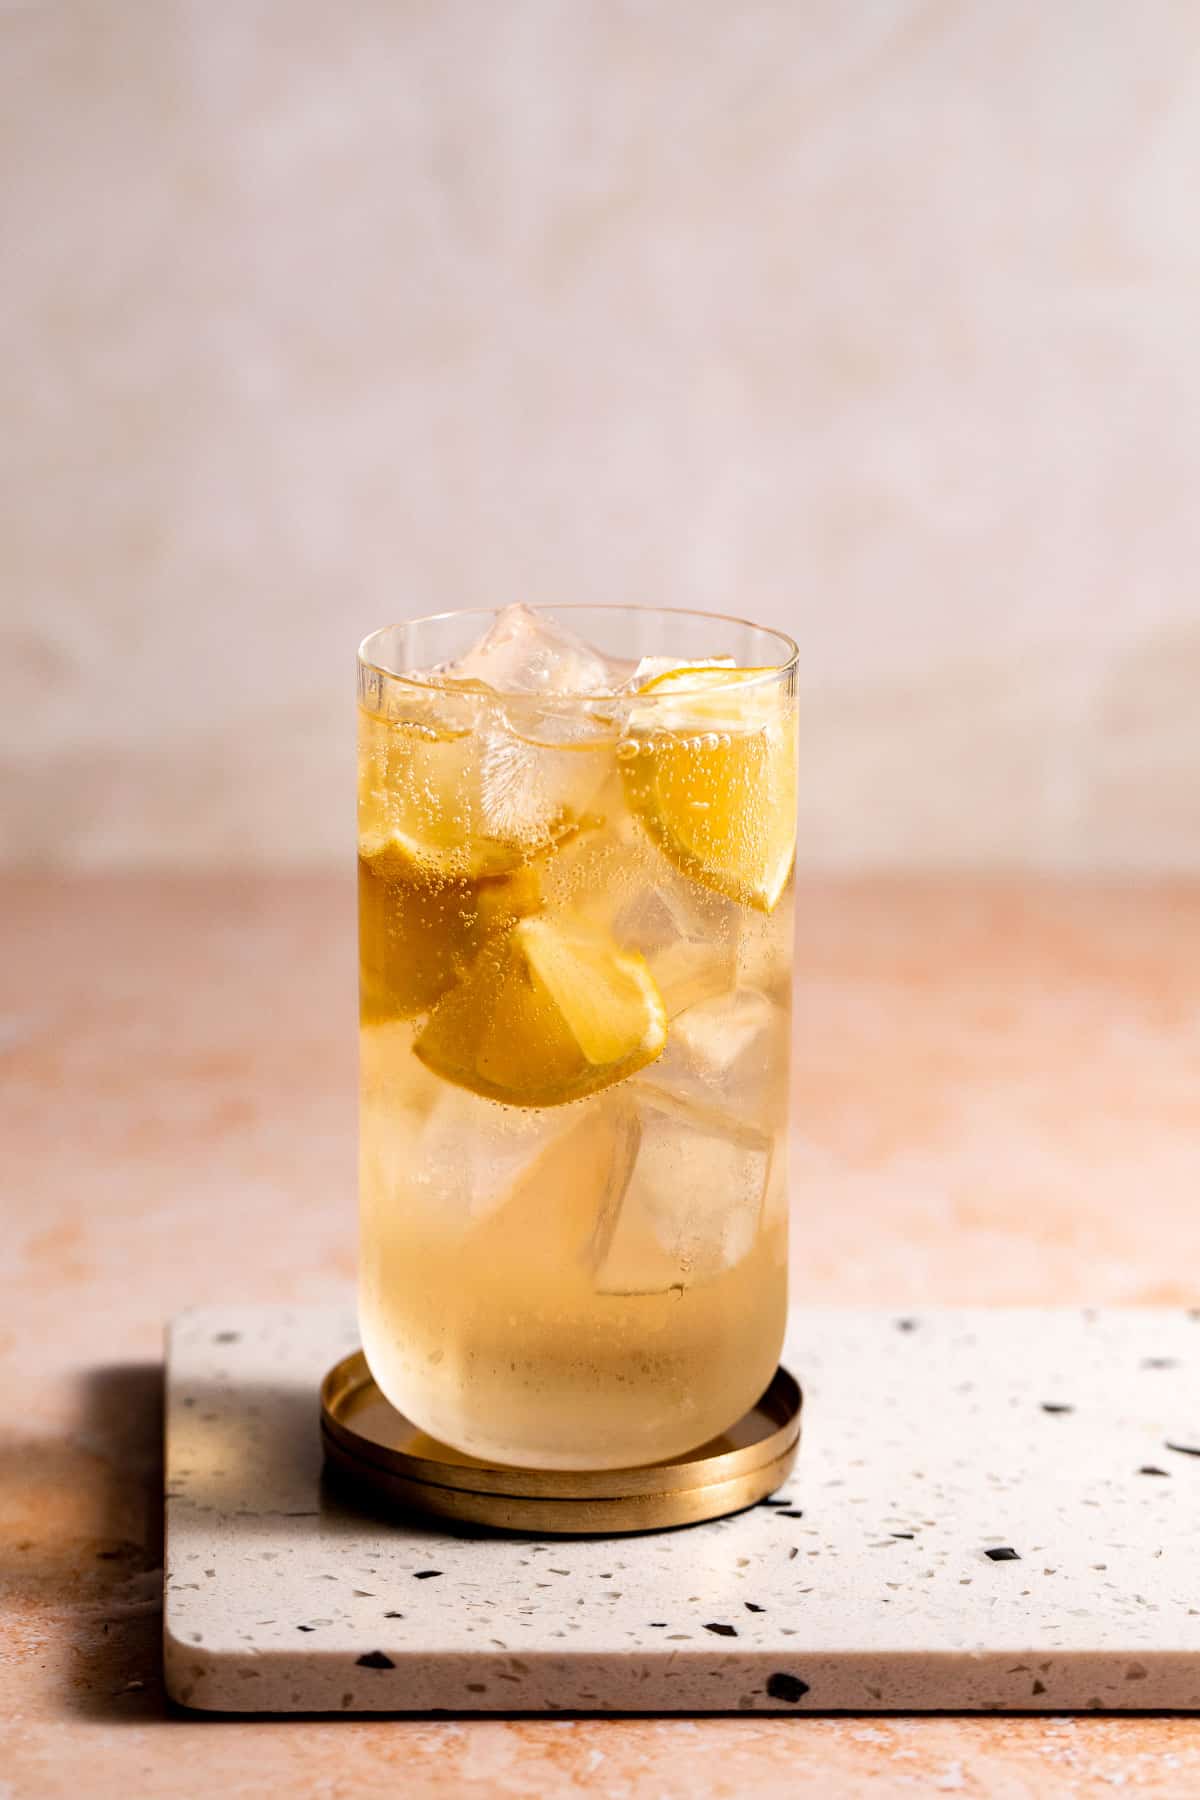 A 7 and 7 cocktail served with ice and lemon wedges in a highball glass.